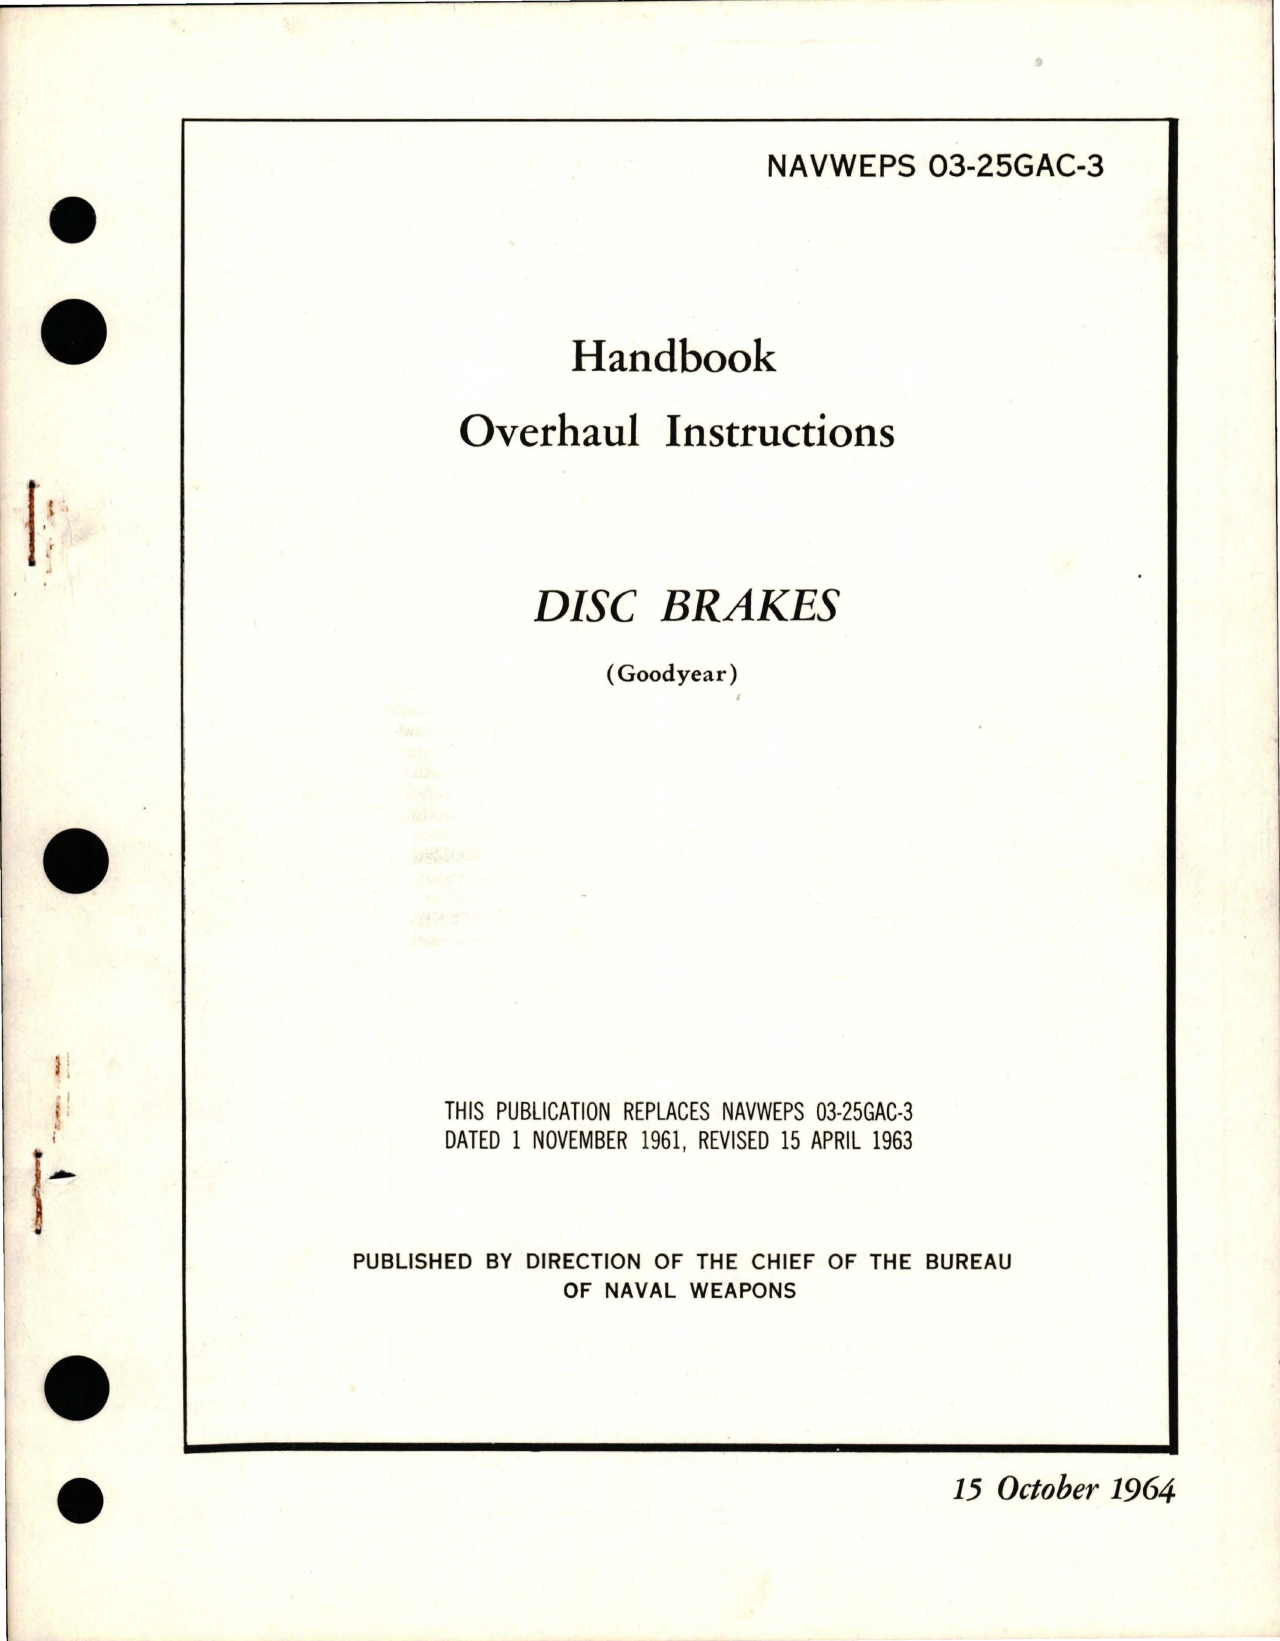 Sample page 1 from AirCorps Library document: Overhaul Instructions for Disc Brakes